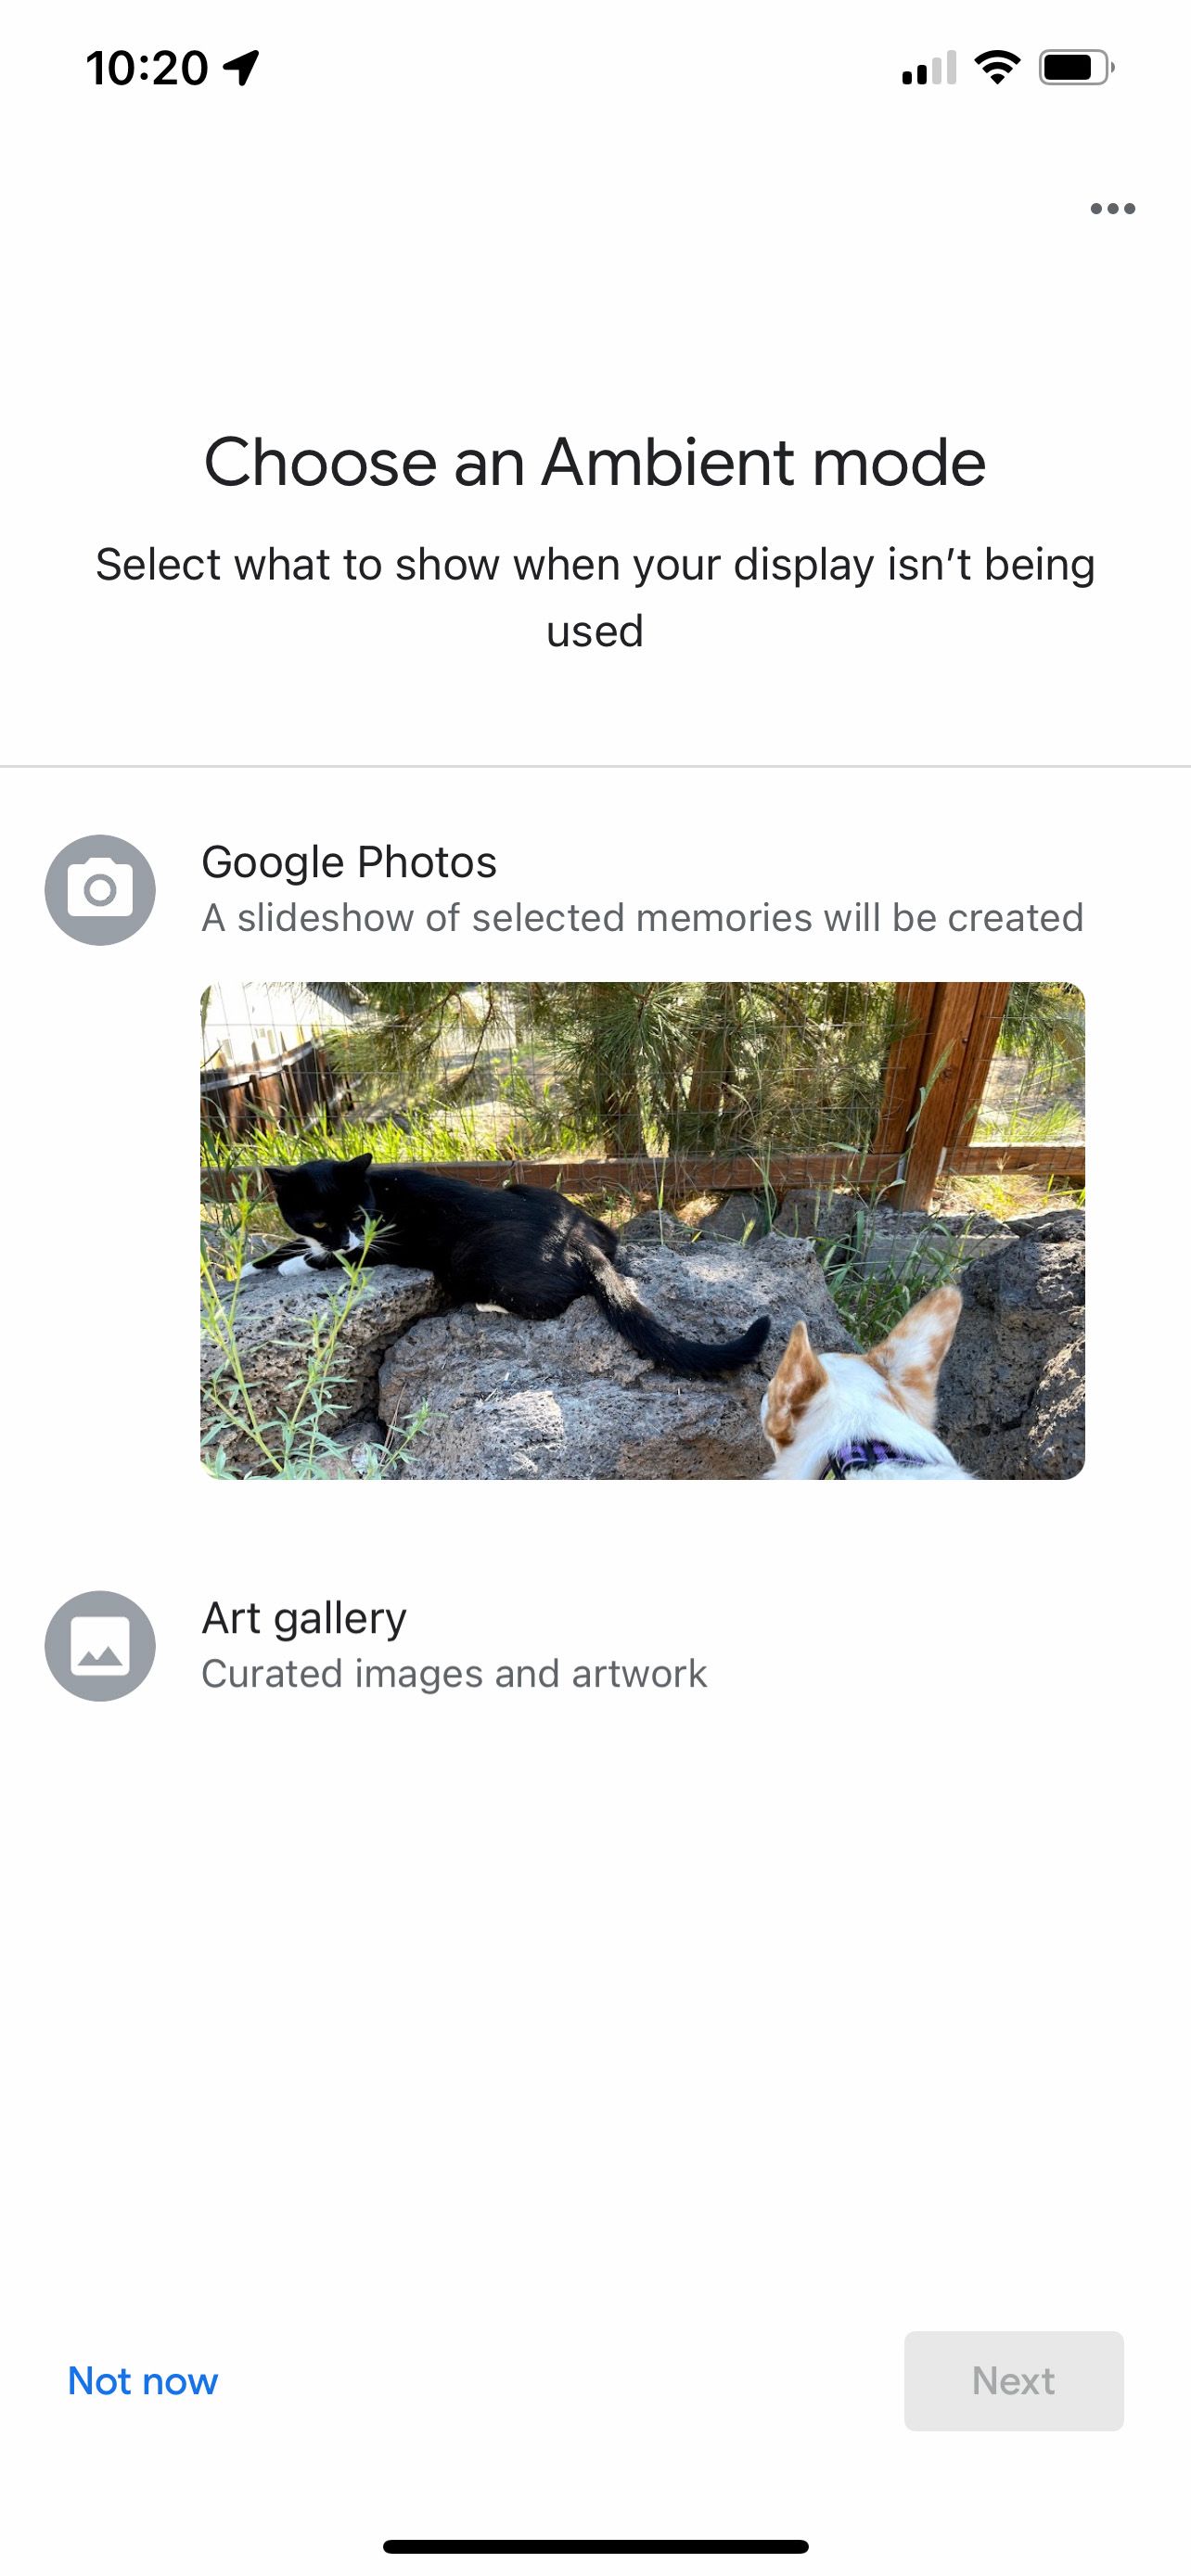 Choose to set up Google photos or Art Gallery in Ambient Mode for Chromecast